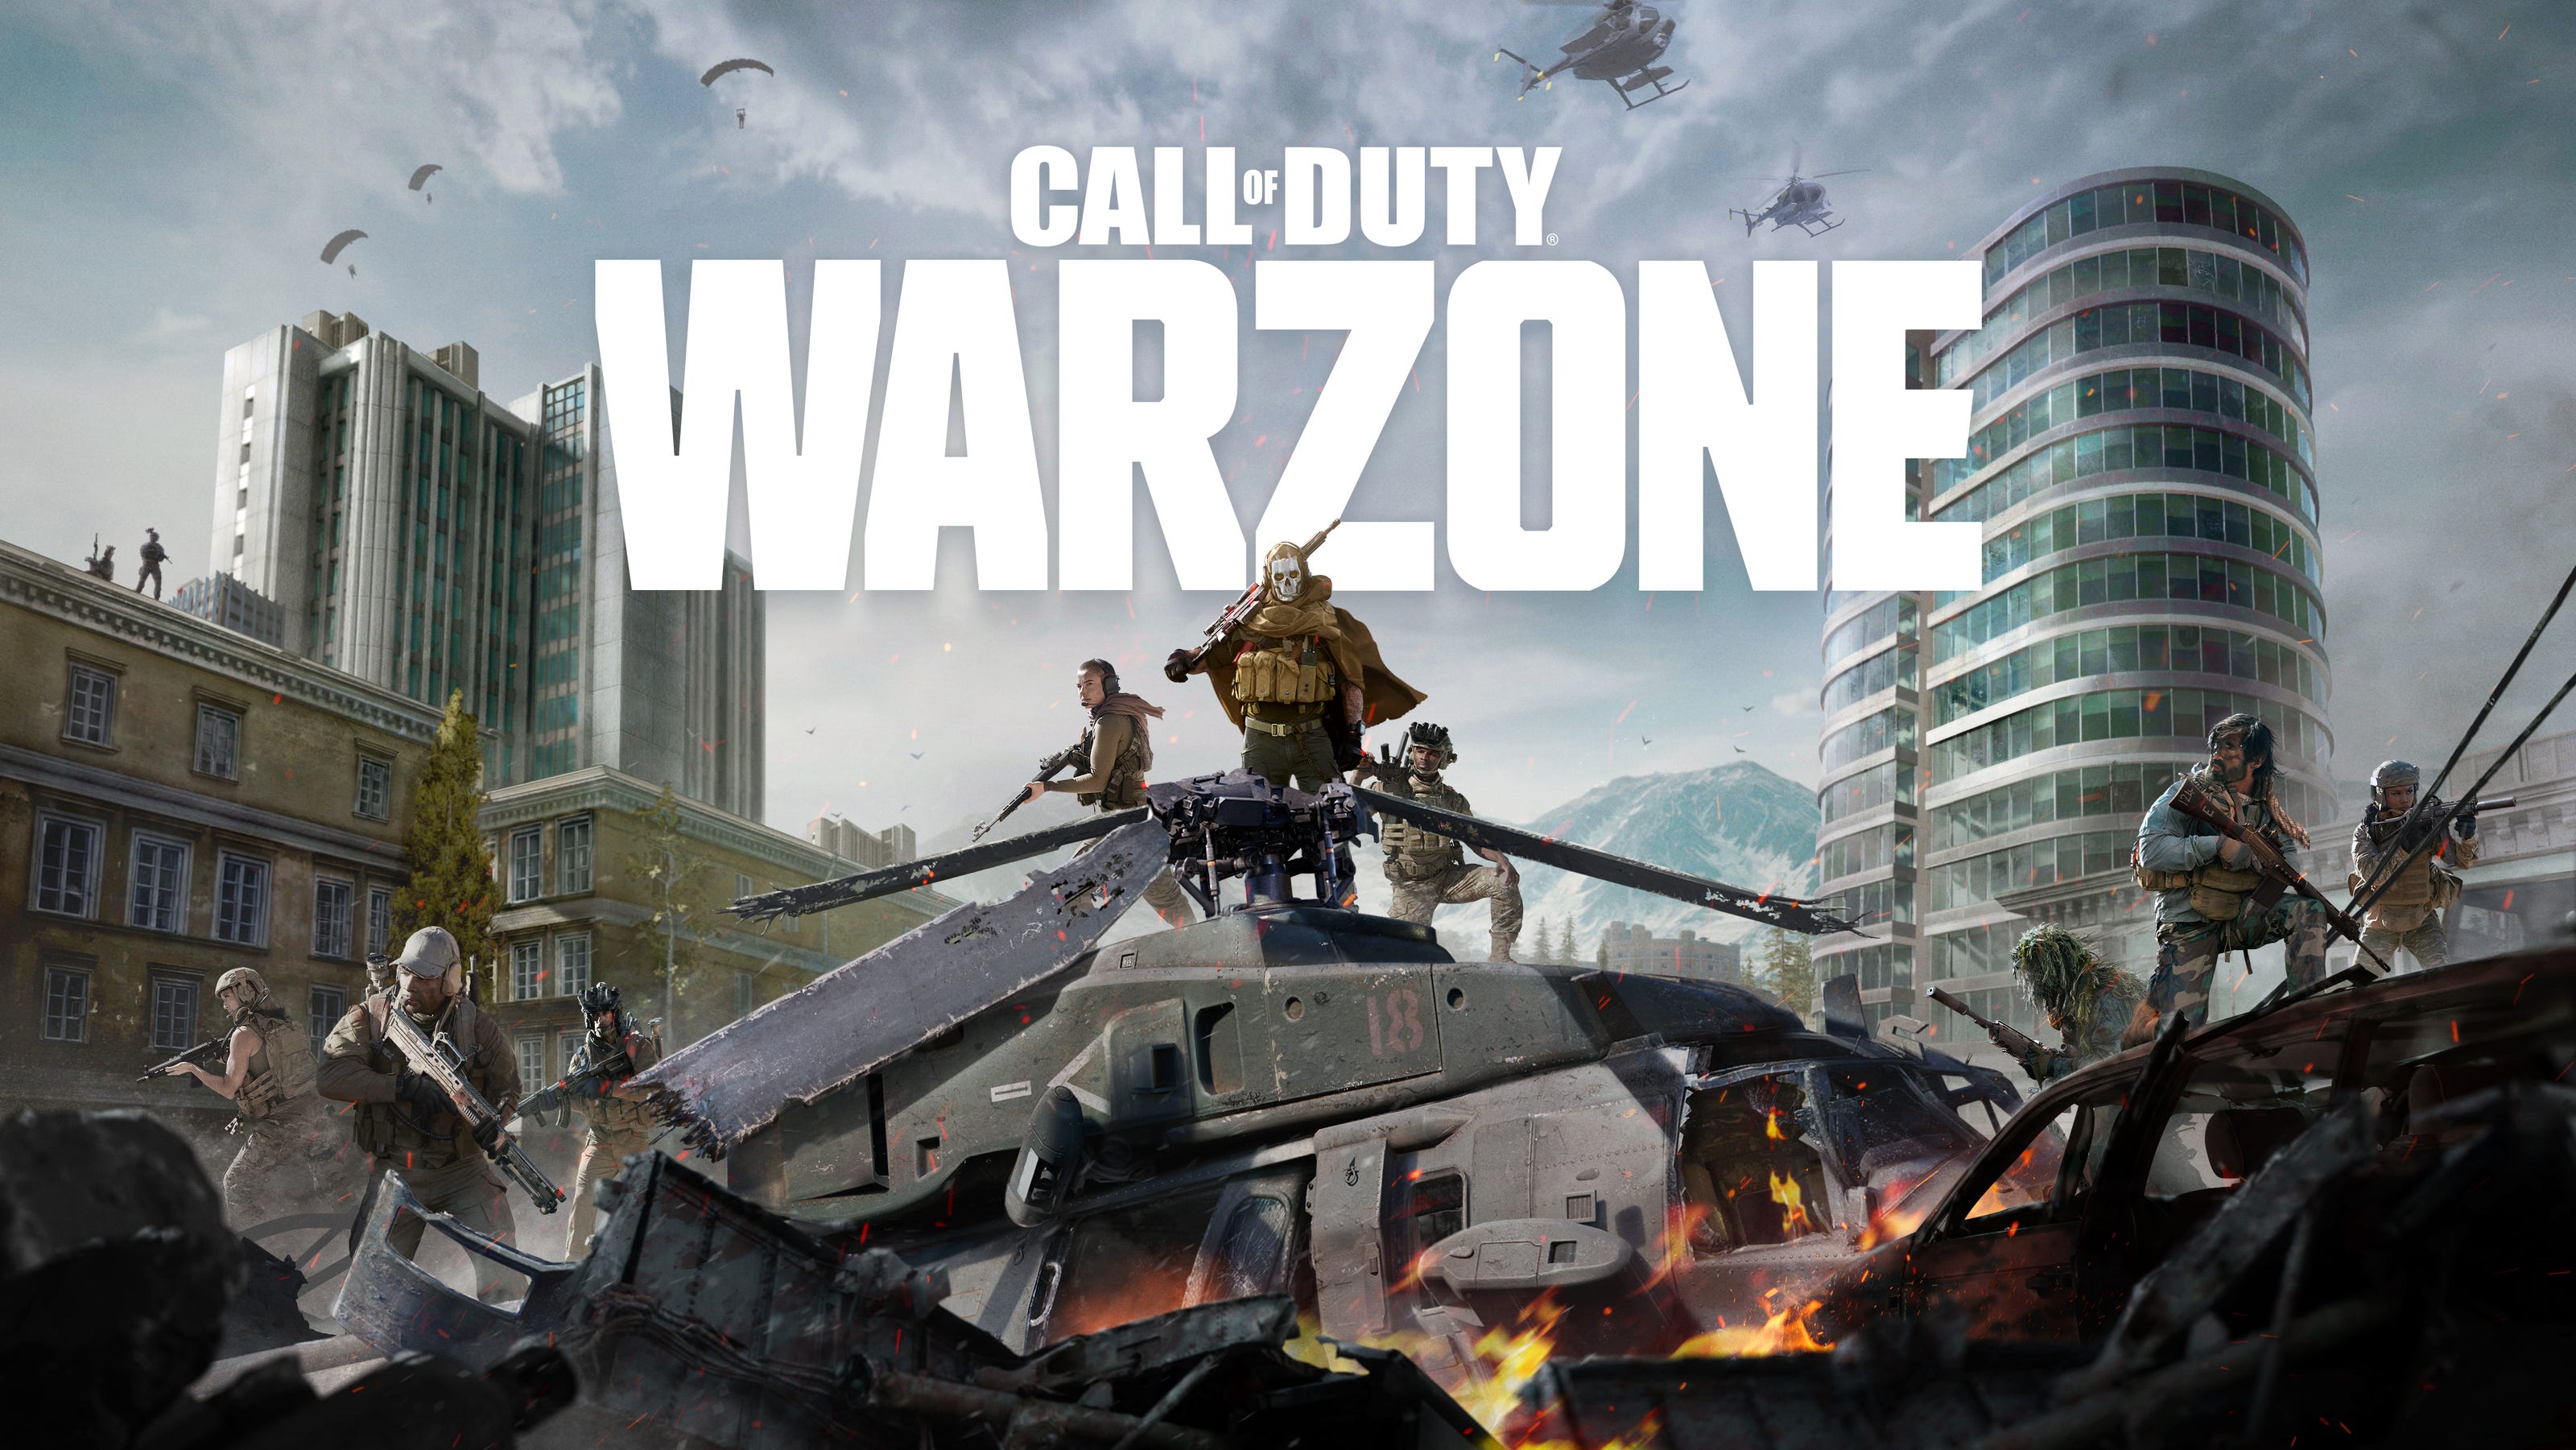 'Call of Duty: Warzone' takes on 'Fortnite' and battle ... - 3200 x 1801 jpeg 621kB